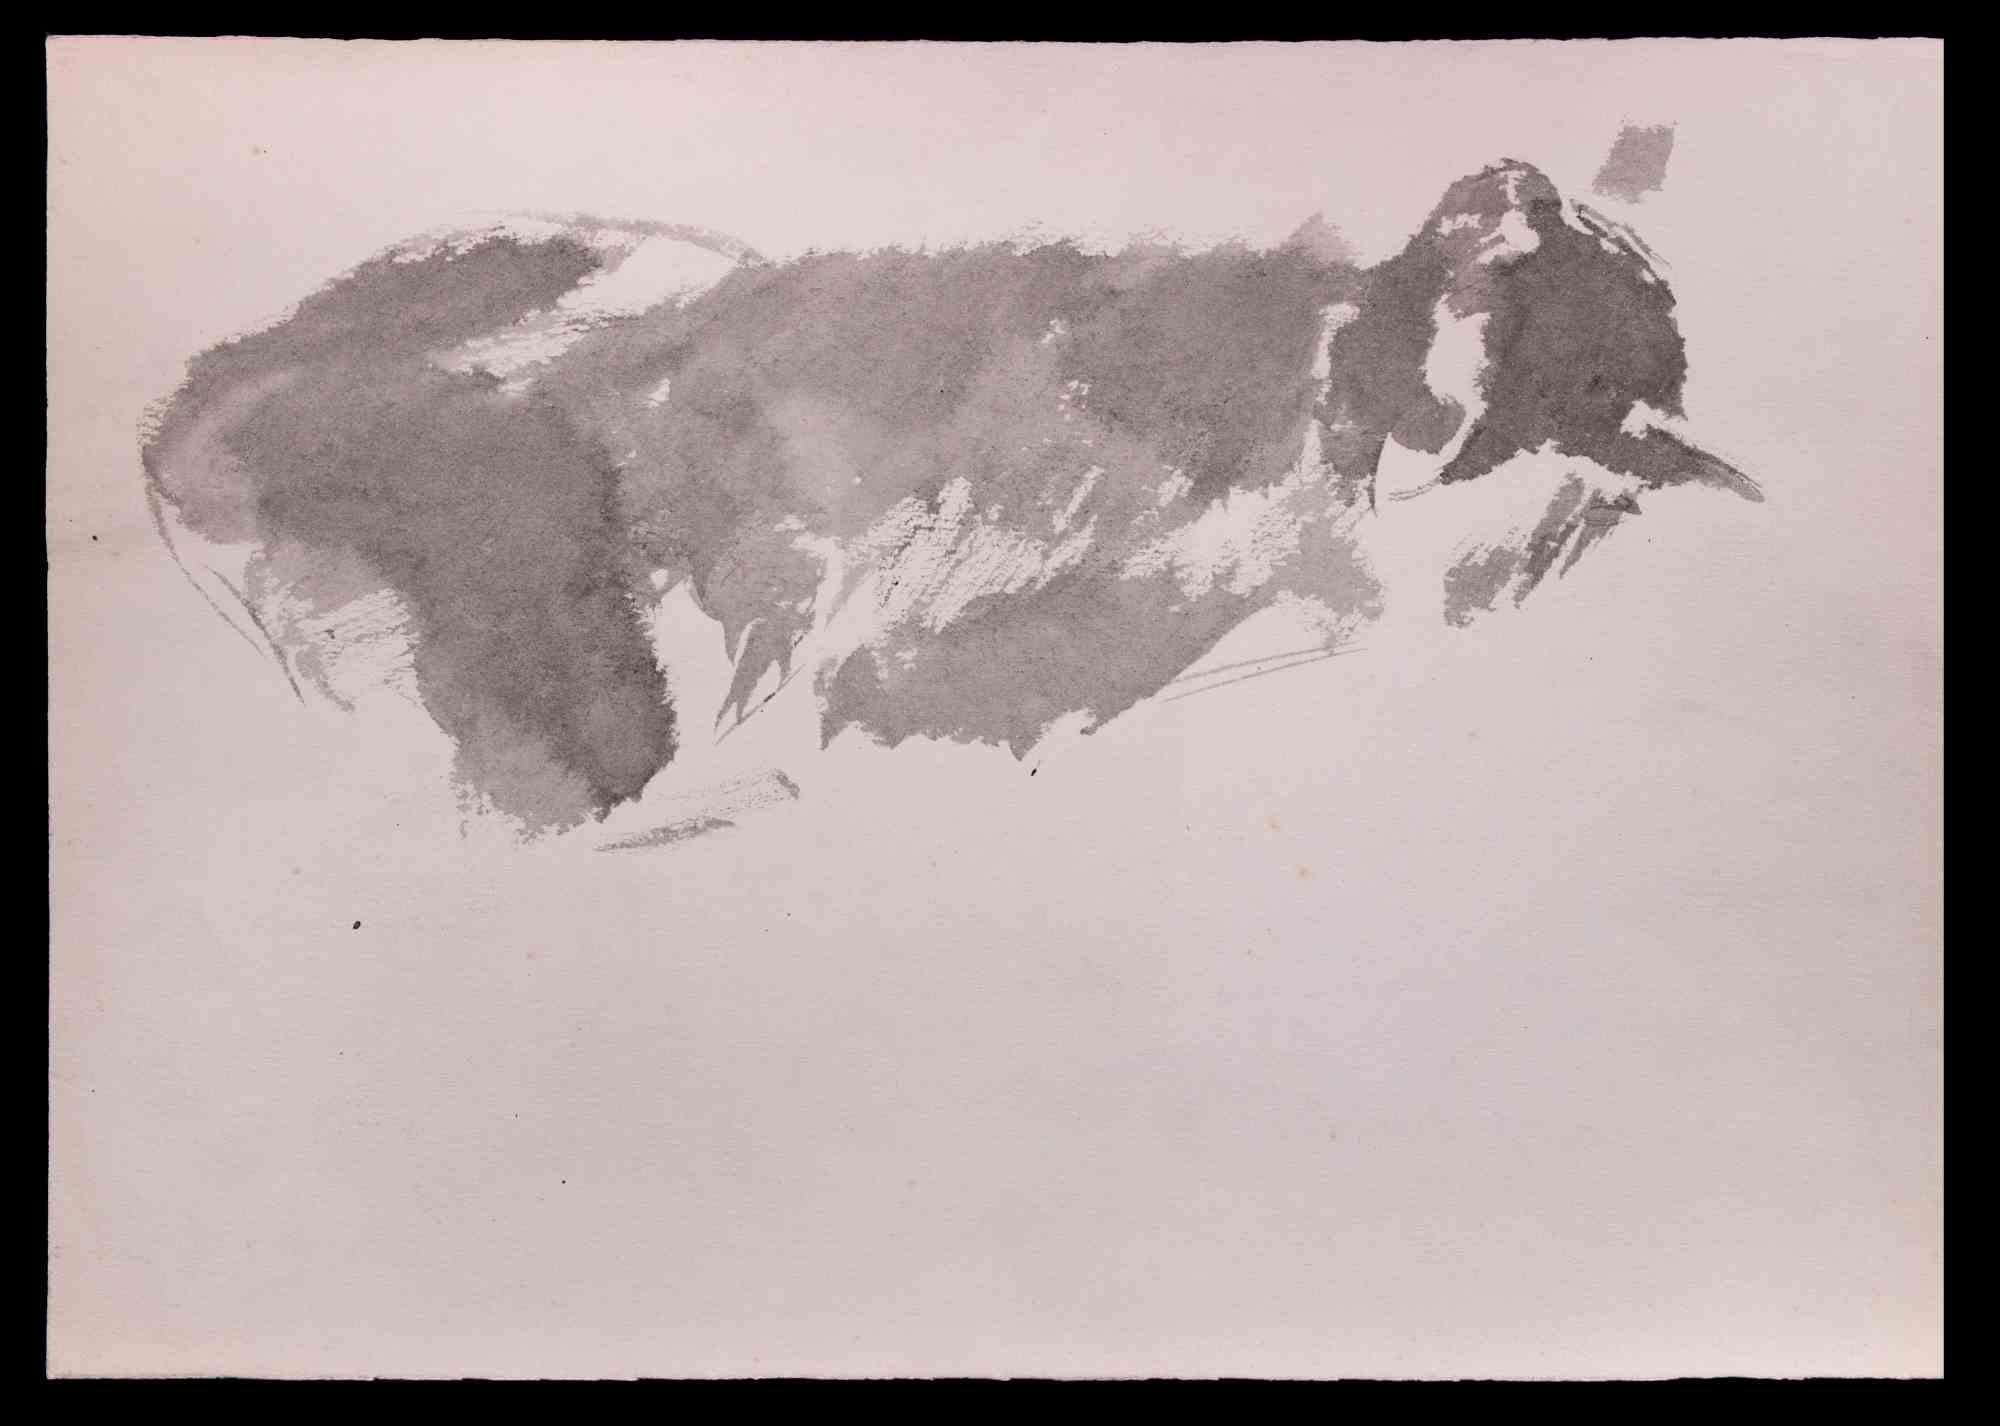 Cat is an Original Drawing in watercolorl realized in the Mid-20th Century by Giselle Halff (1899-1971).

Good conditions.

Giselle Halff (1899-1971) born in Hanoi, student of R.X. Prinet, R. Ménard, L. Simon, B. Boutet de Monvel. Animal painter and